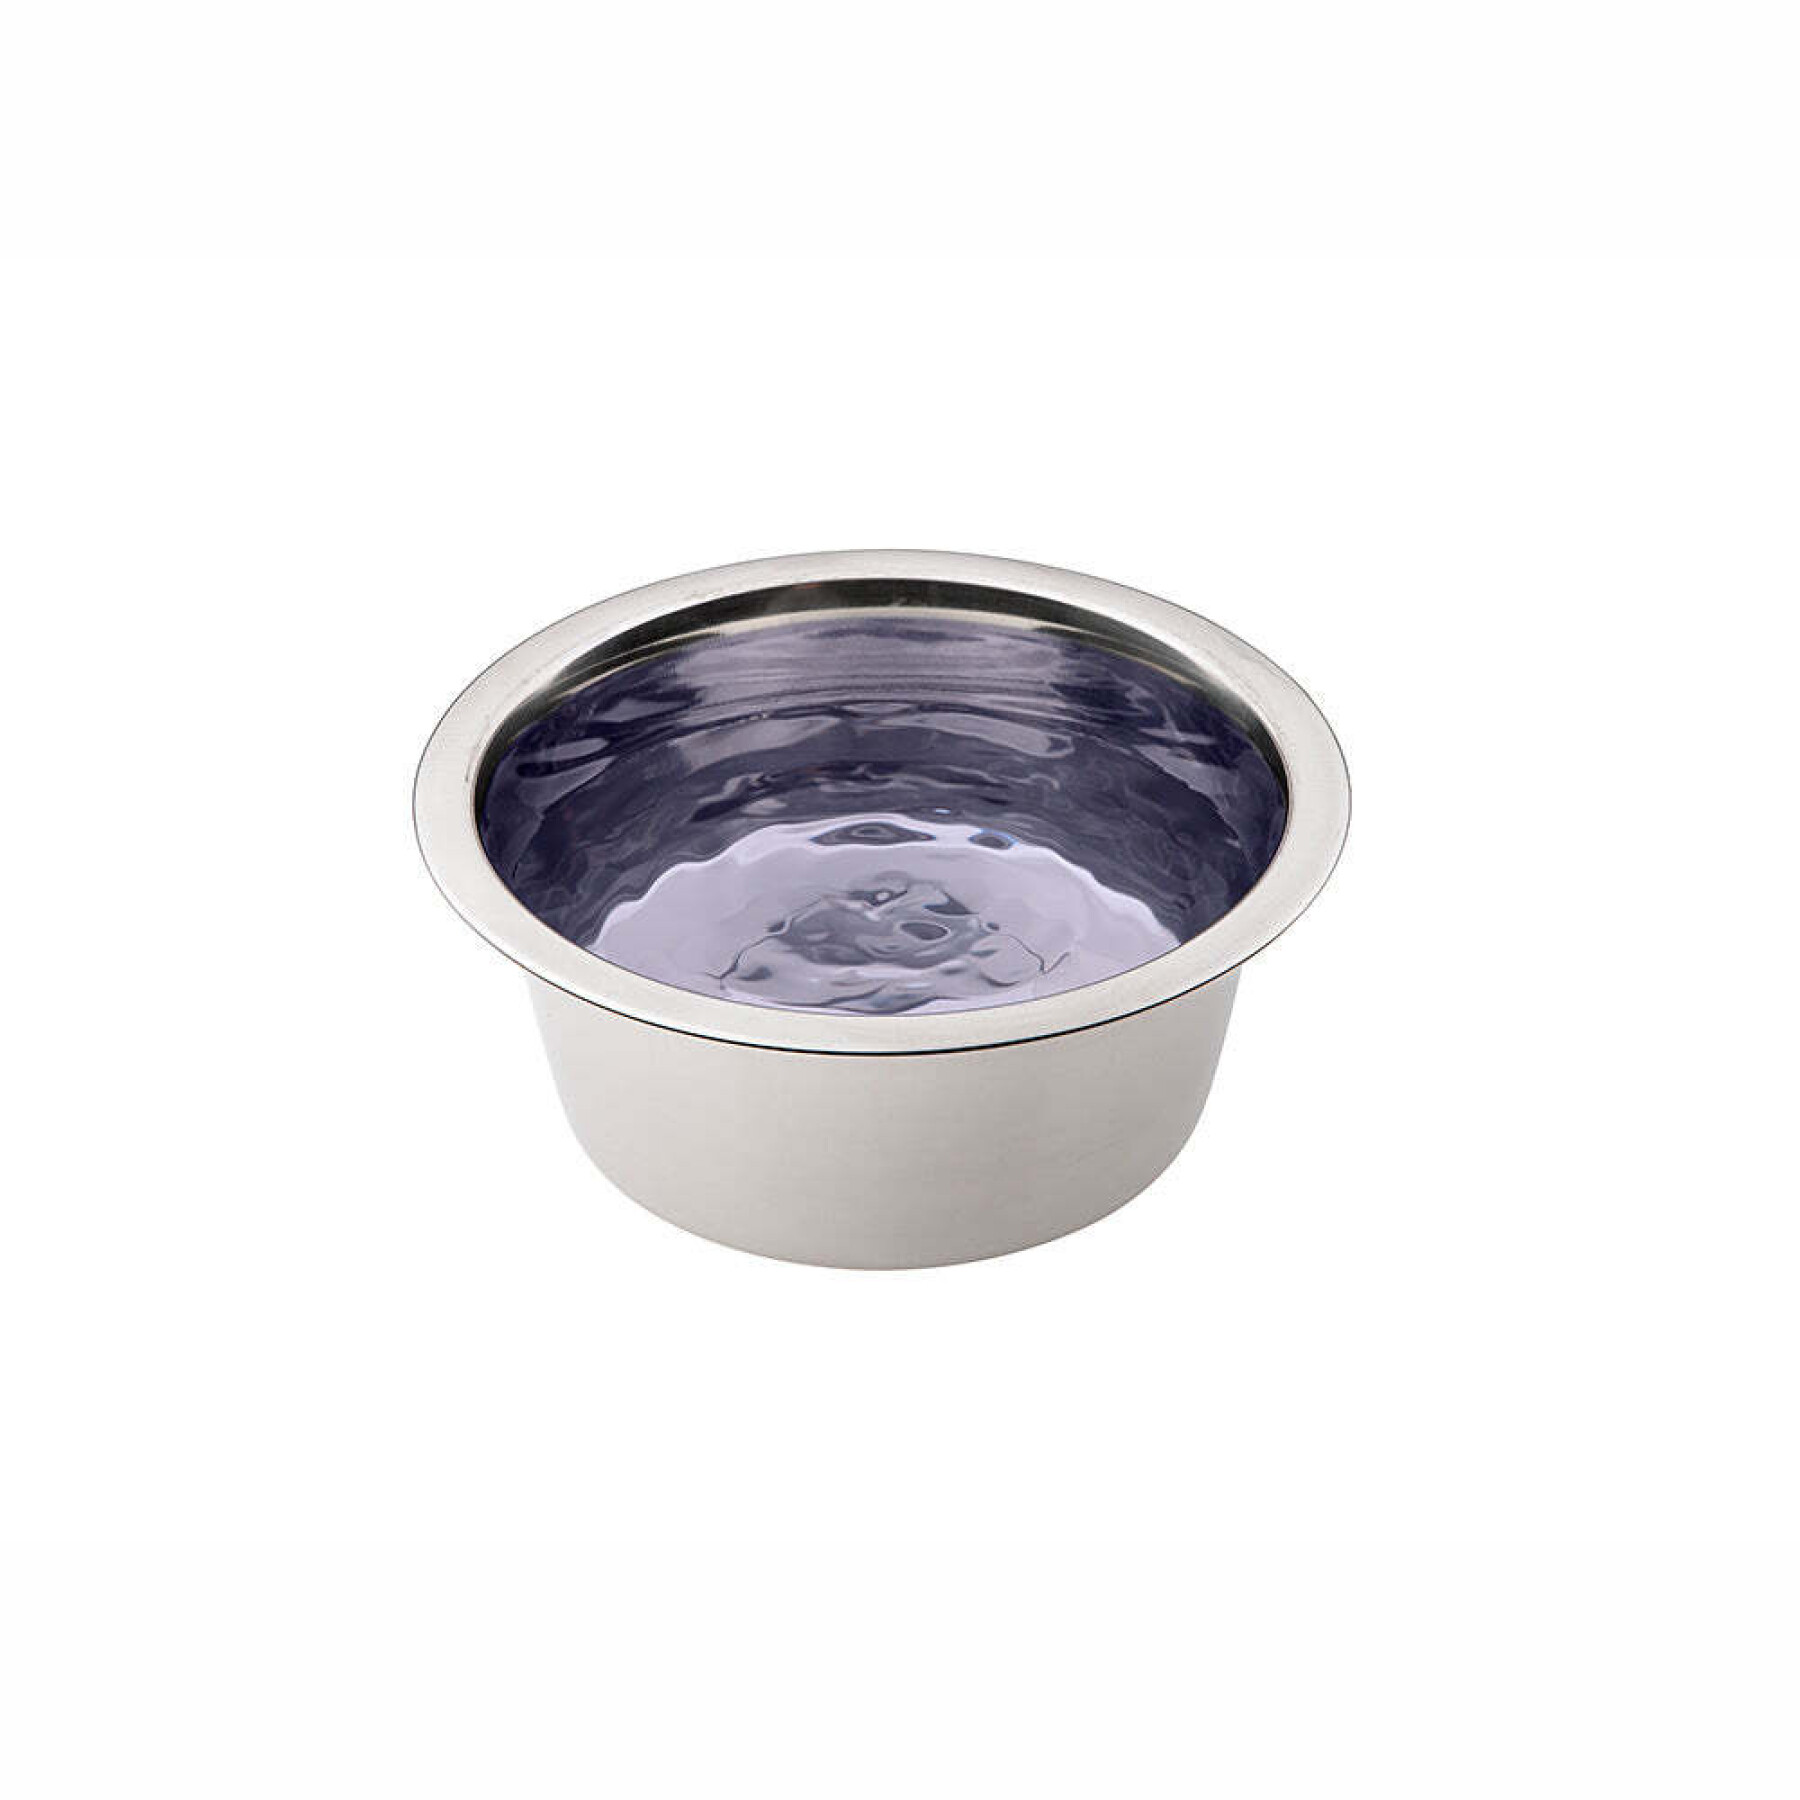 Dog and cat bowls Ferplast Orion 50